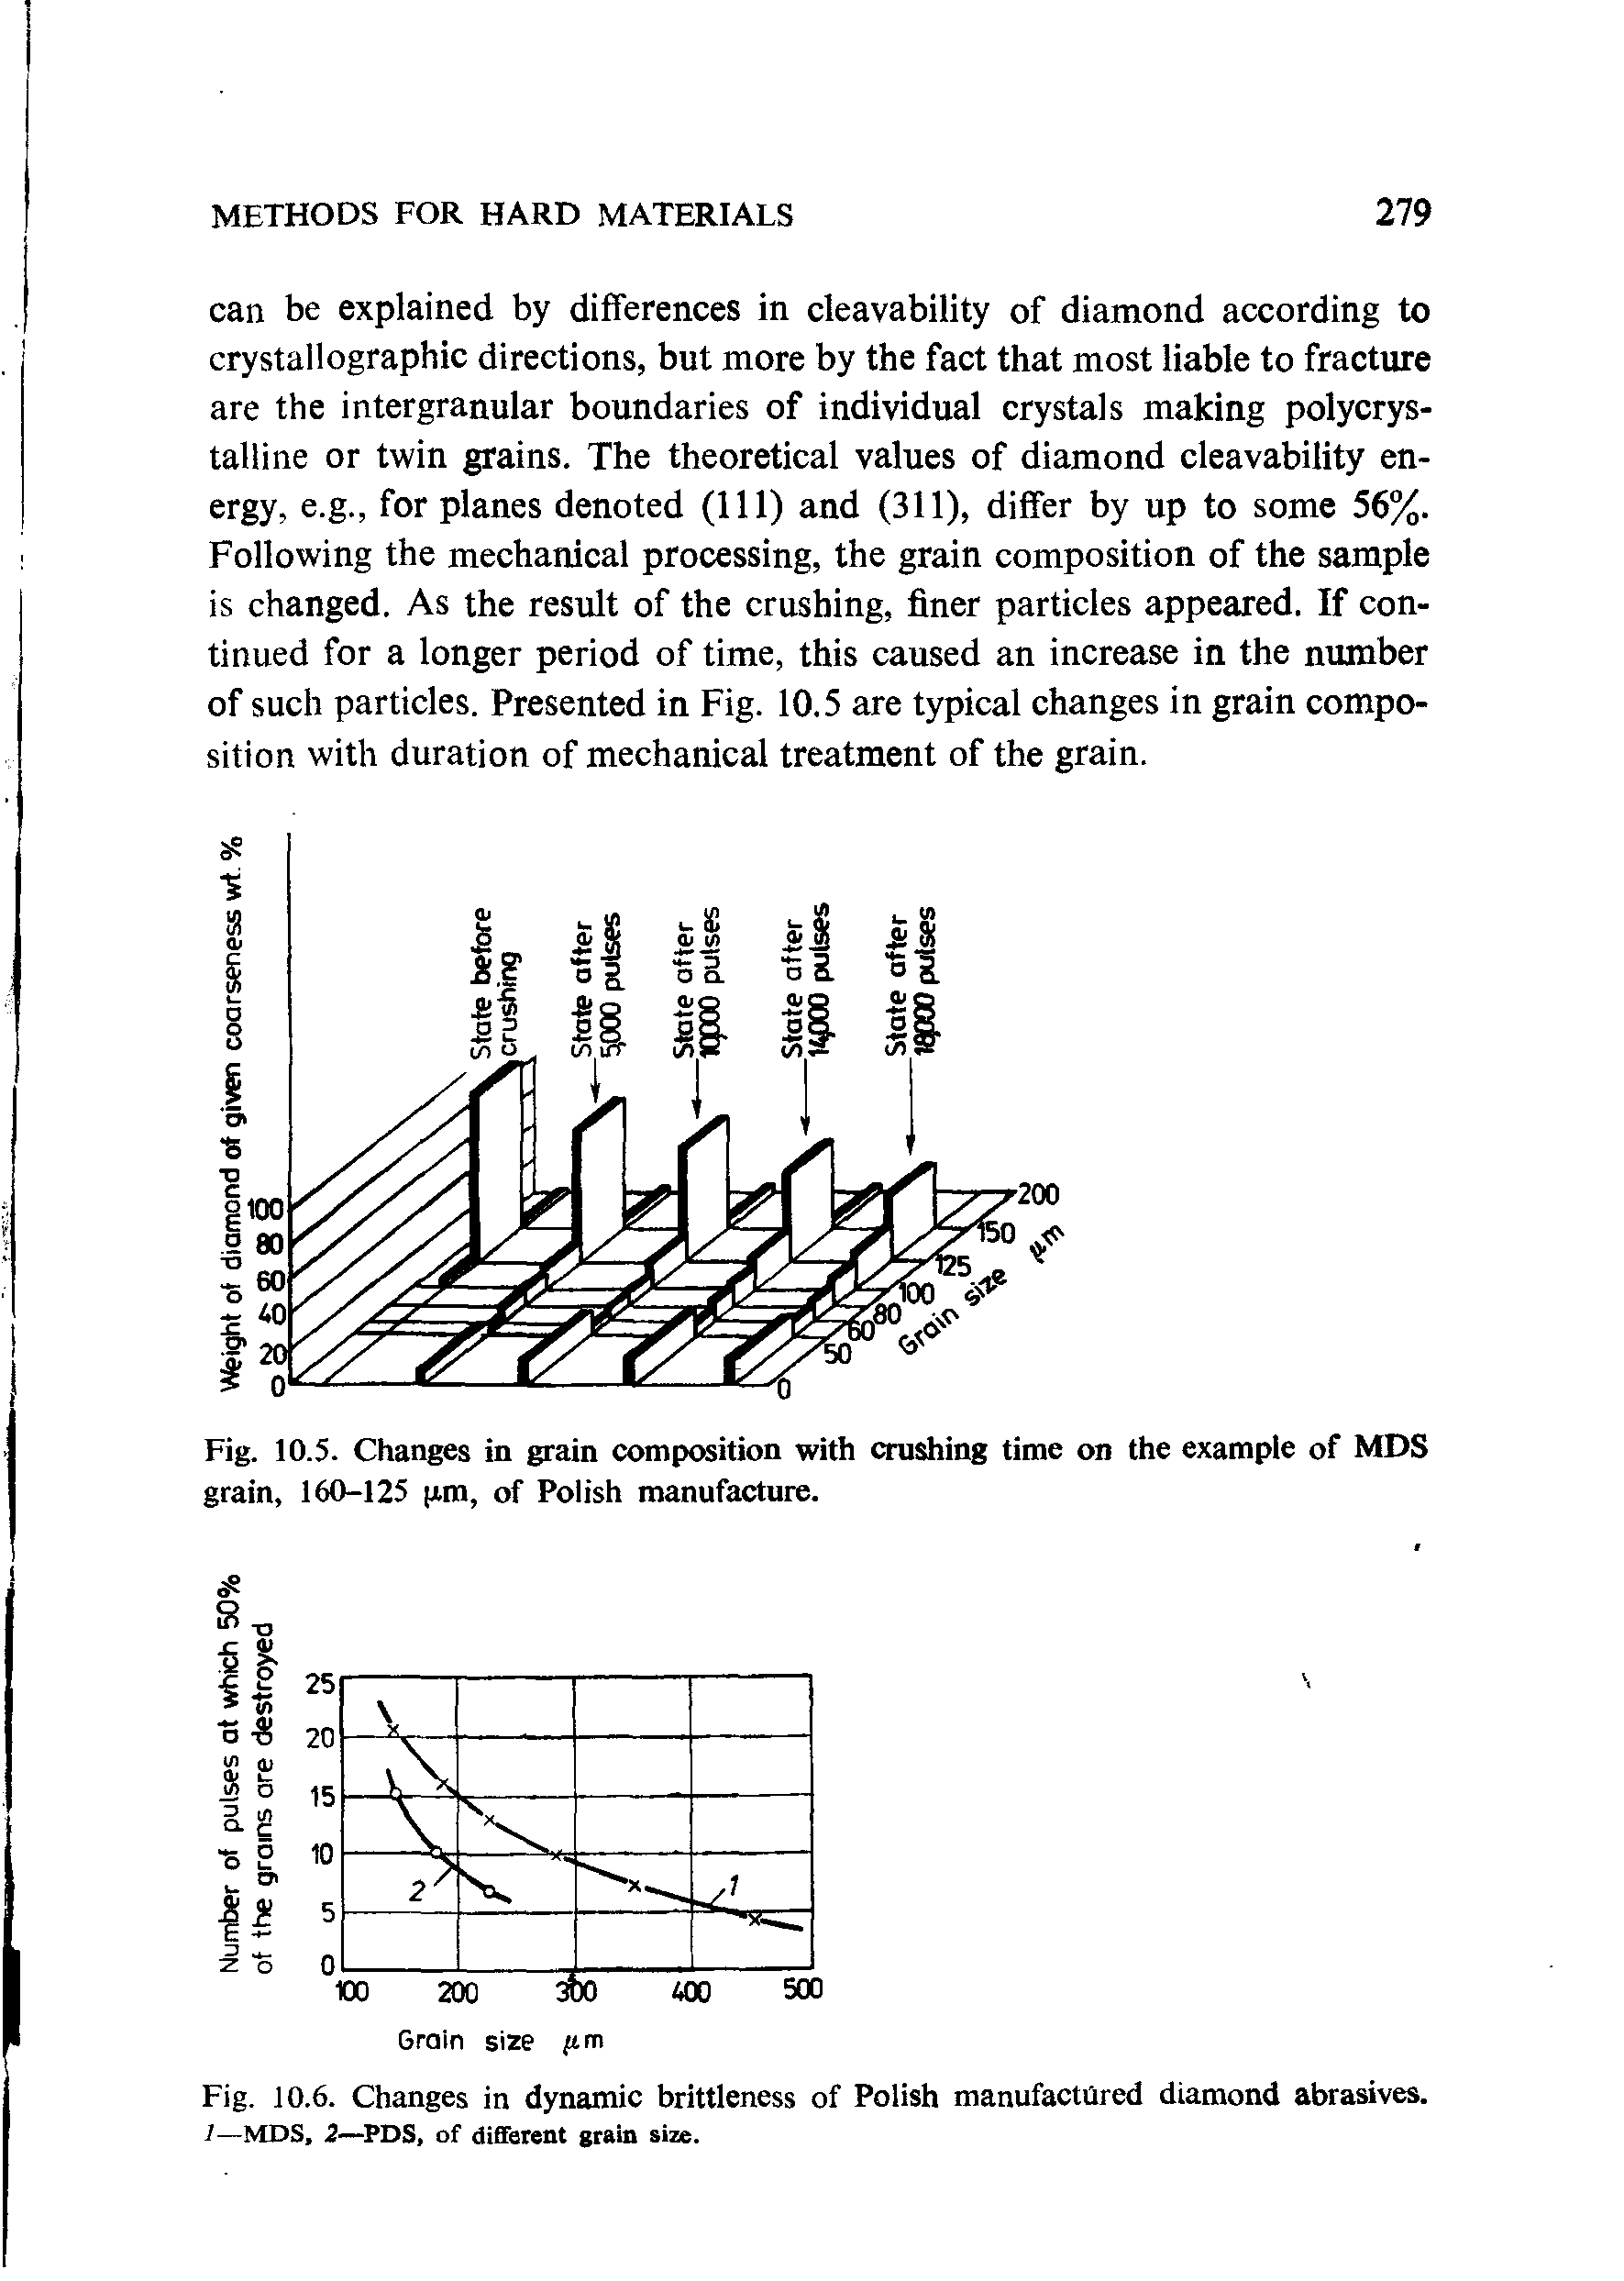 Fig. 10.6. Changes in dynamic brittleness of Polish manufactured diamond abrasives. 1—MDS, 2—PDS, of different grain size.